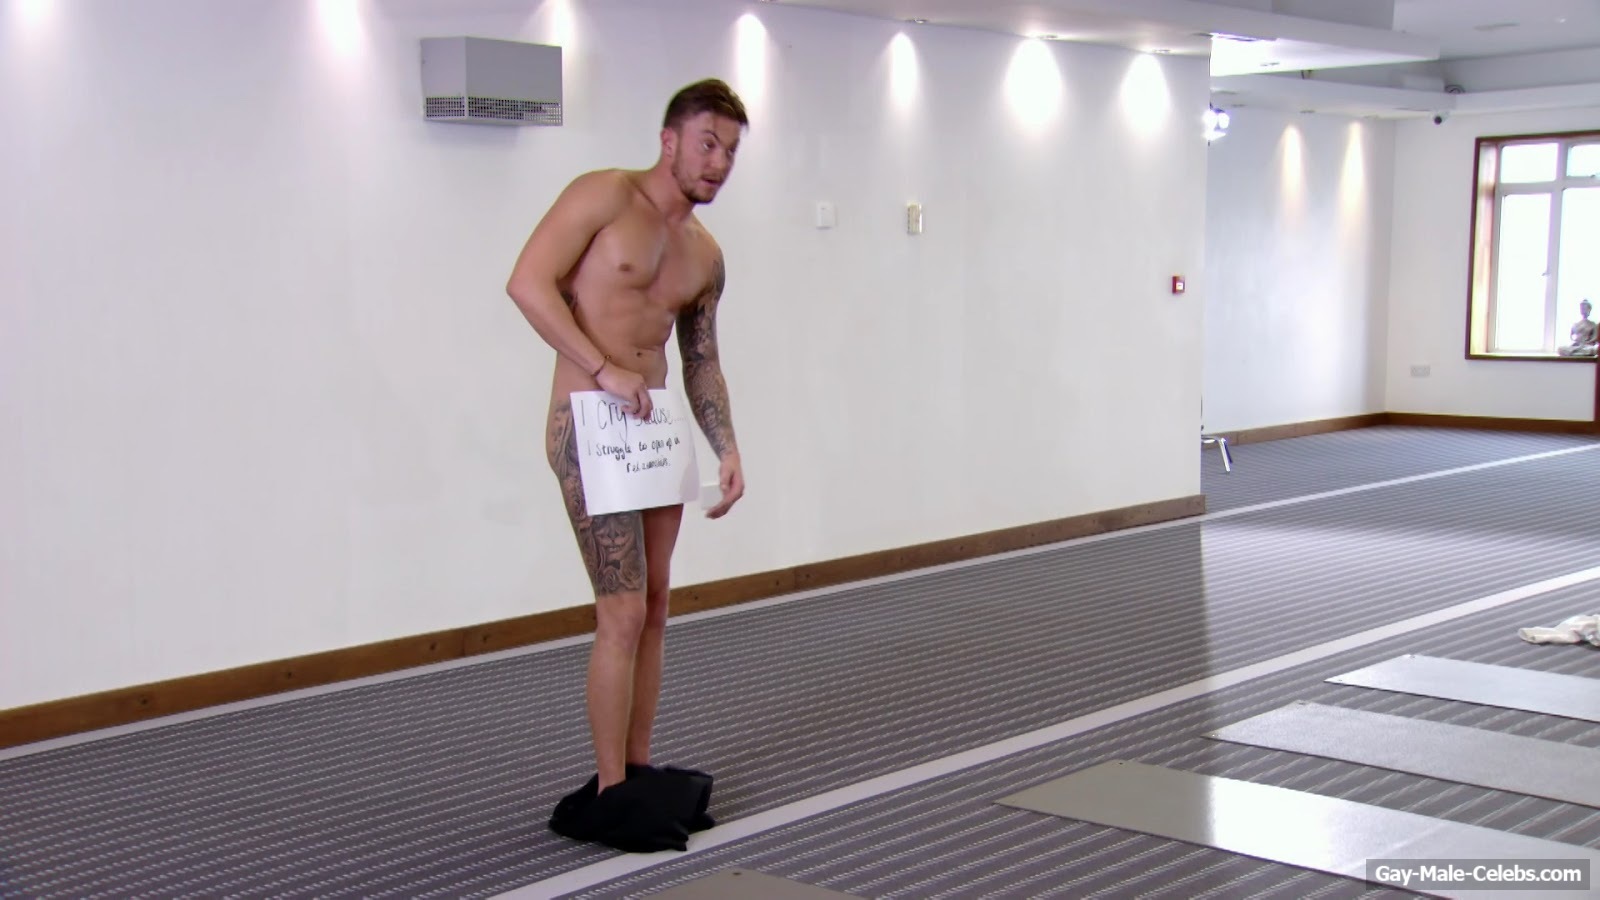 Sam Mucklow Nude Bum In The Only Way Is Essex